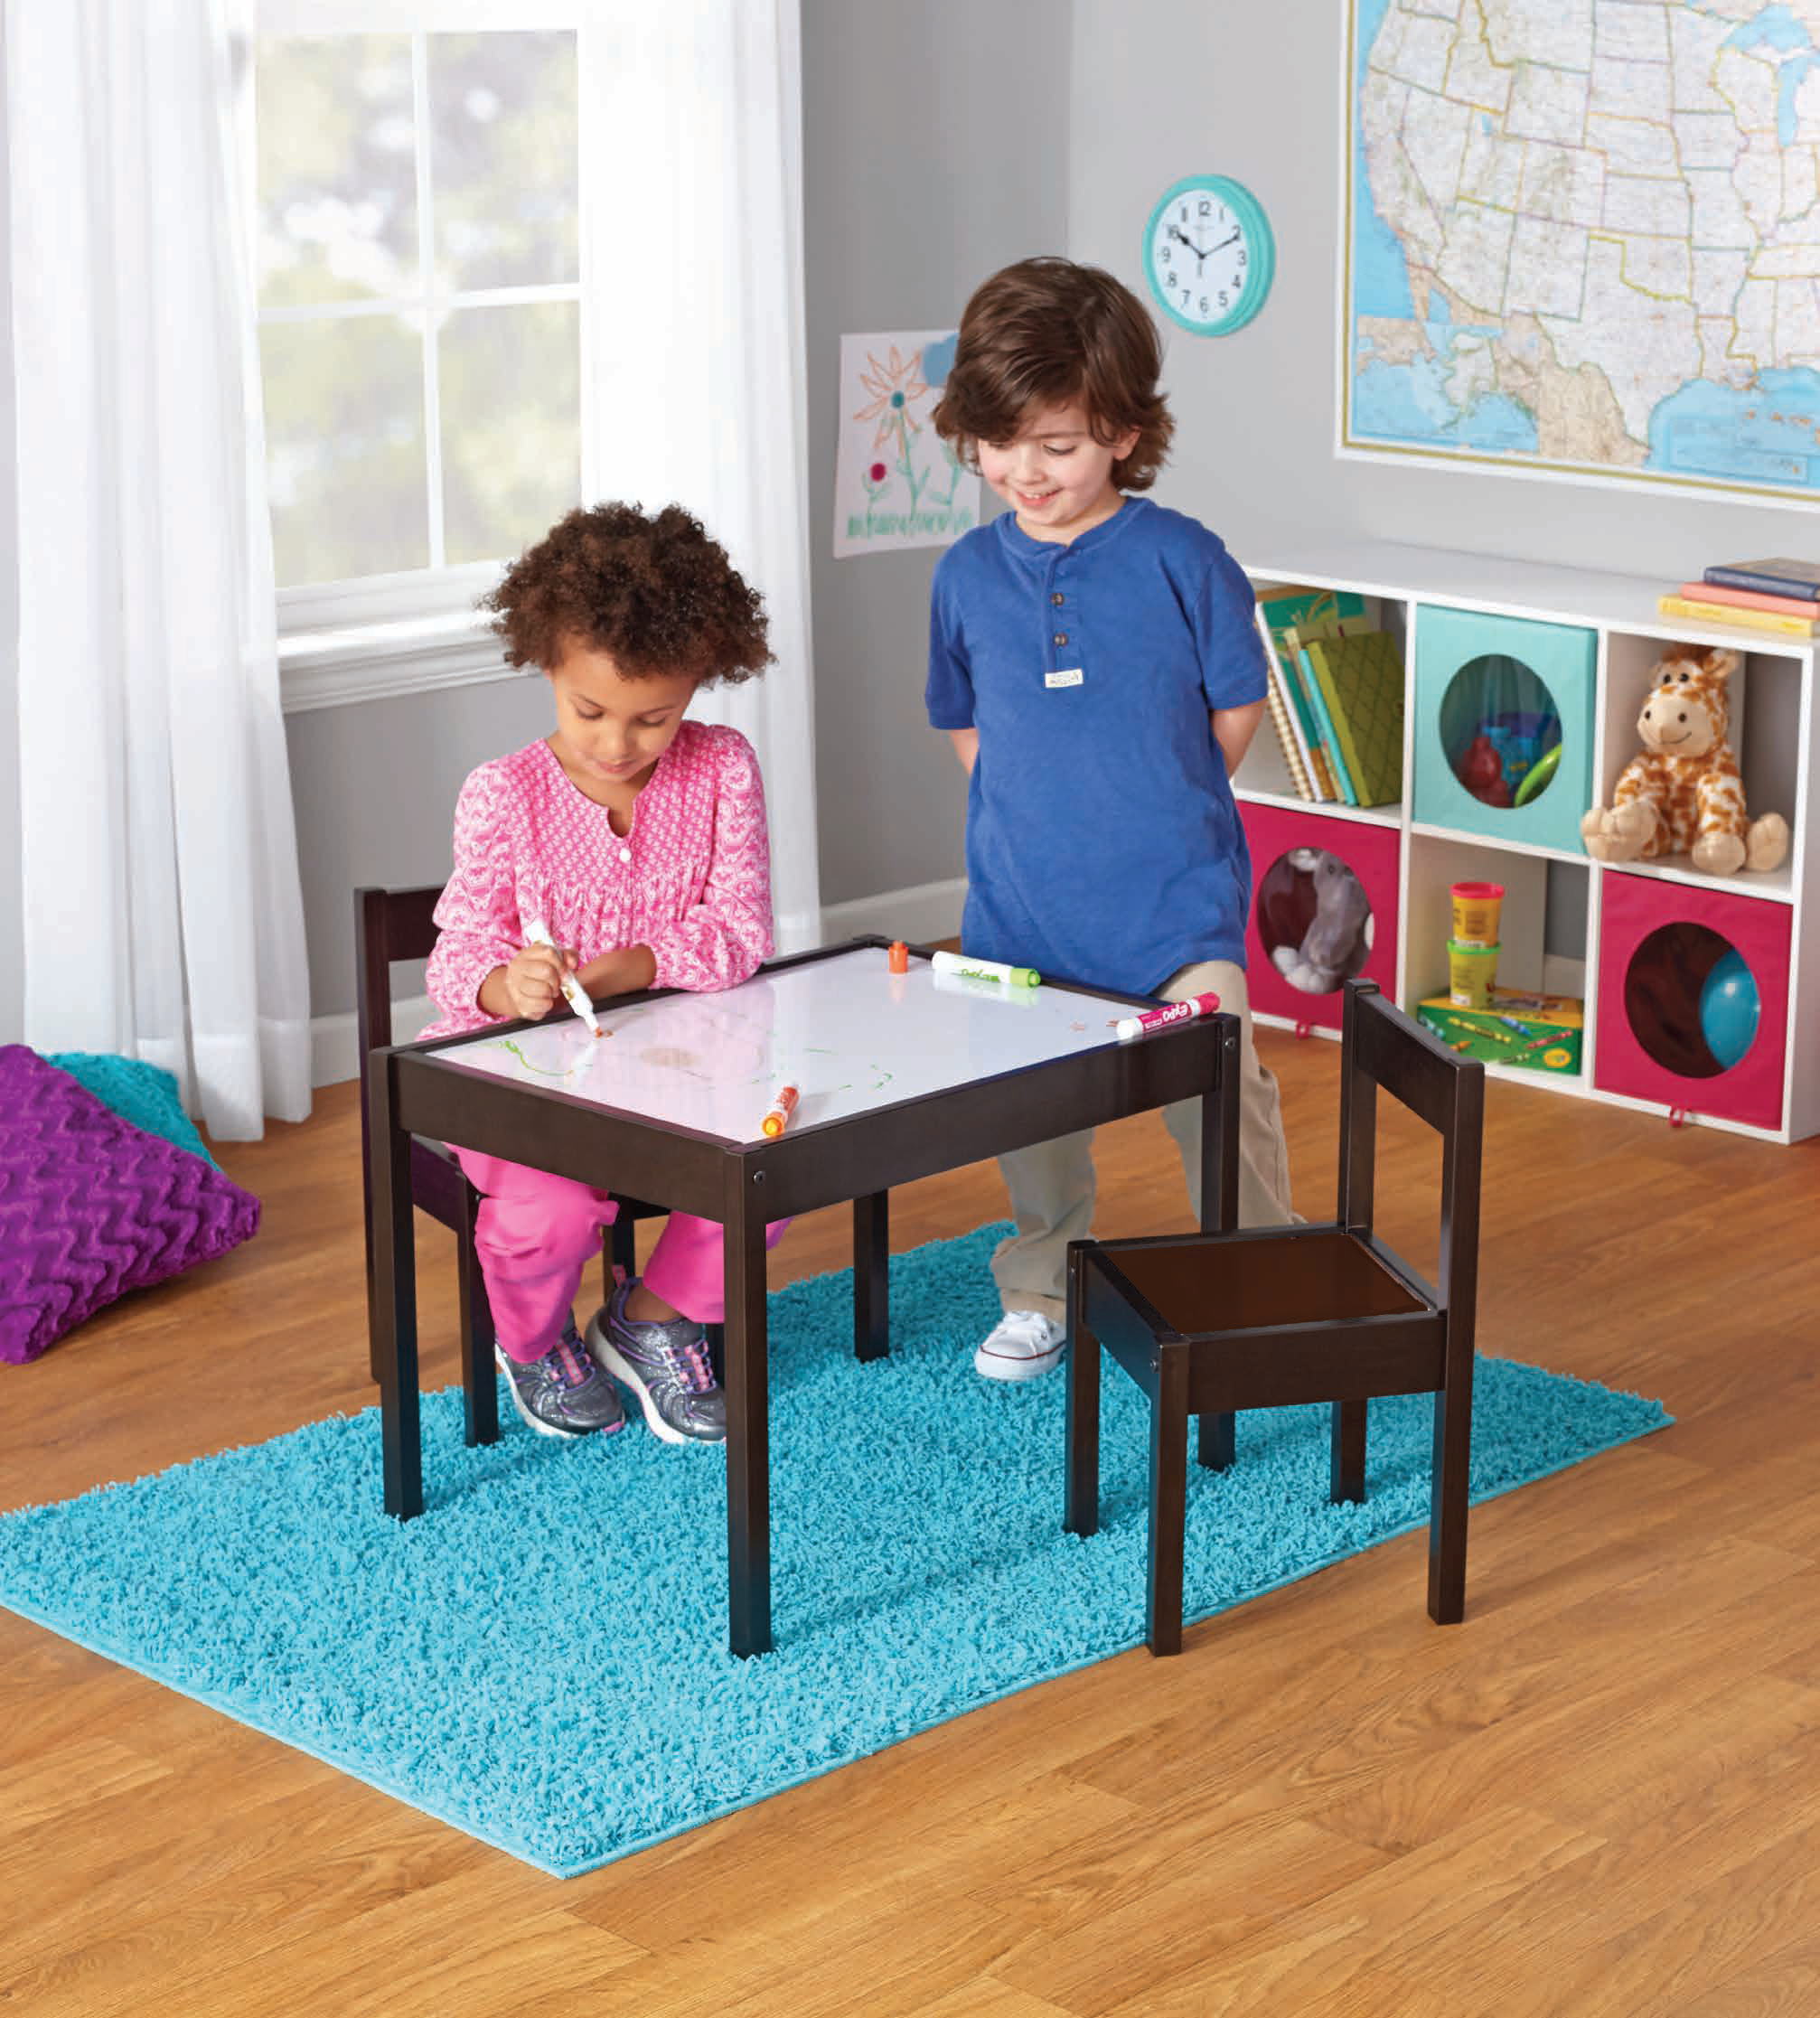 Your Zone Child 3-Piece Table and Chairs Set, in Espresso Age Group 1 to 5 Years Old. - image 3 of 6